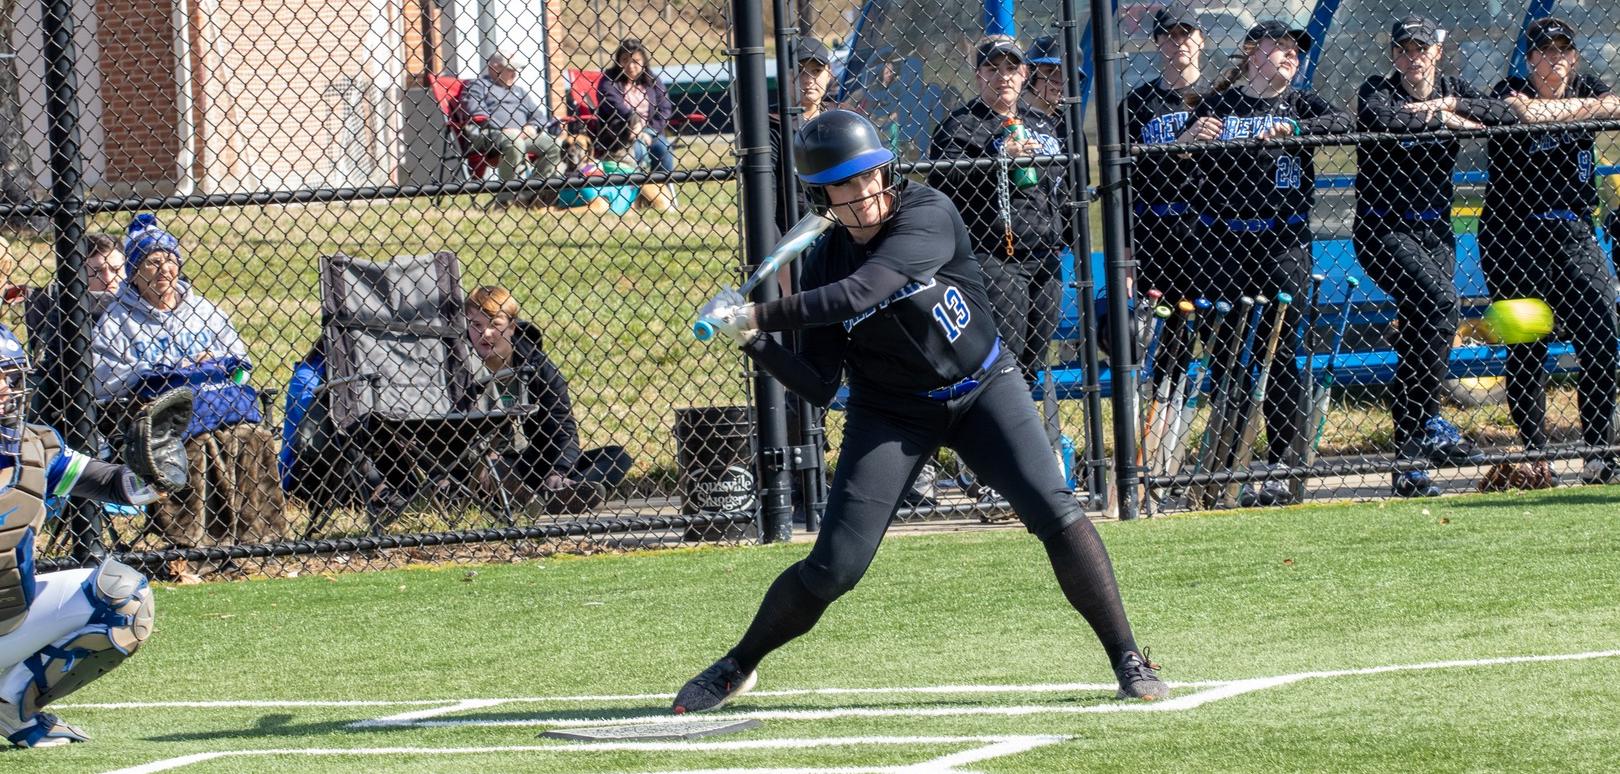 Sophomore Jocelyn Folkers helped lift BC over St. Joseph with a 2-for-3 performance at the plate with two runs scored (Photo courtesy of Victoria Brayman '22).